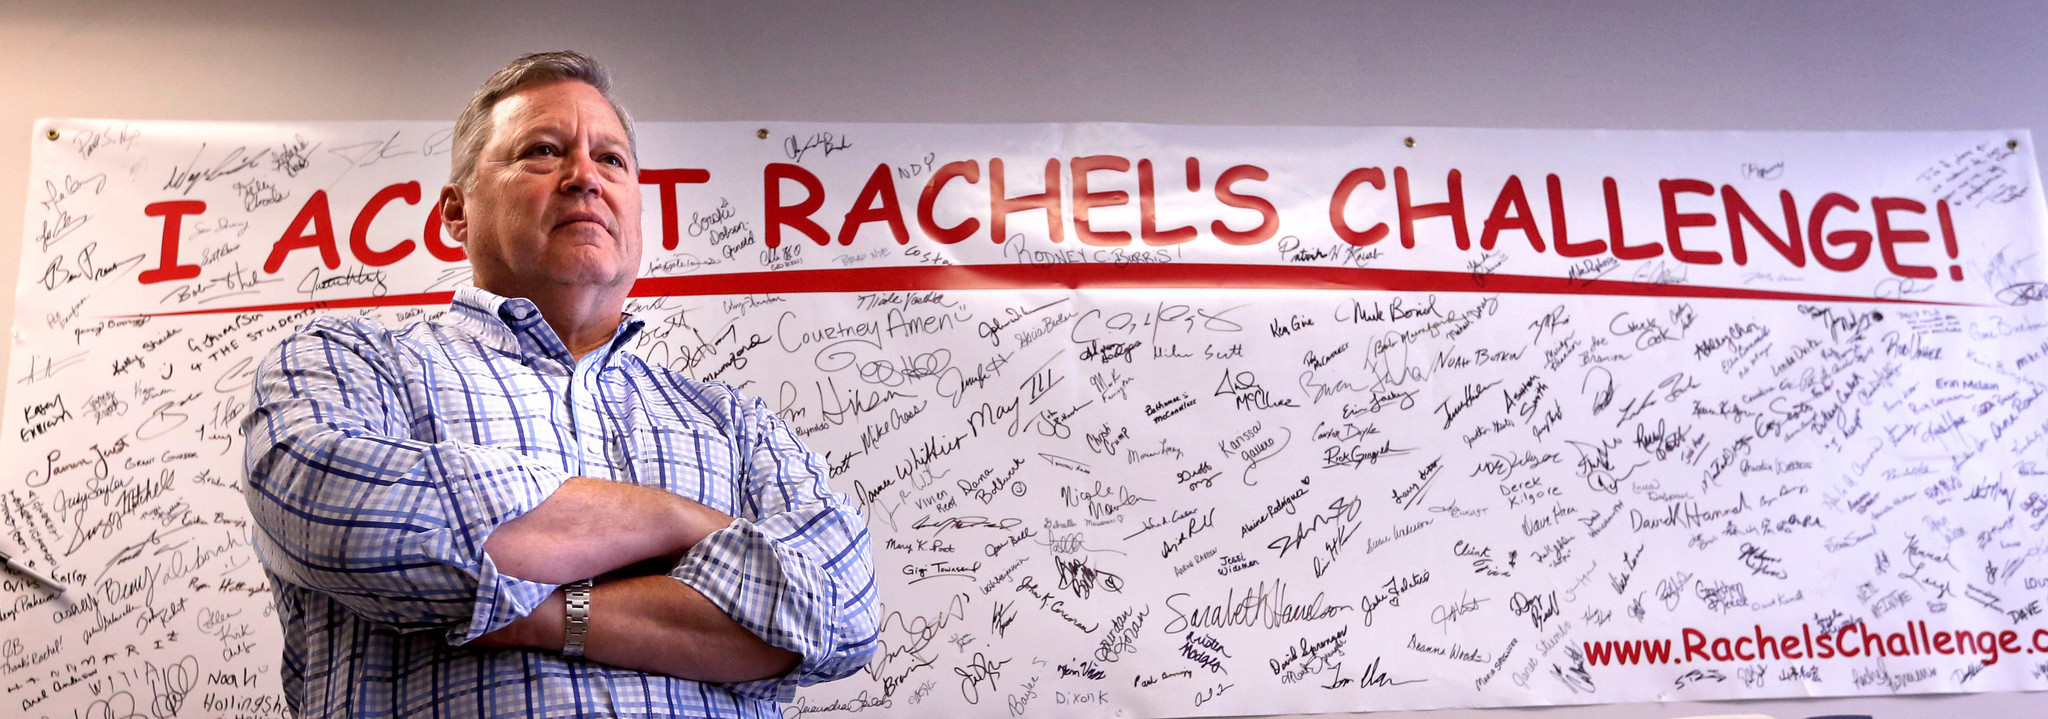 Rob Unger is the CEO of Rachel’s Challenge, which fosters a “culture of kindness” and was founded in honor of Rachel Scott — the first student killed during the high school massacre.